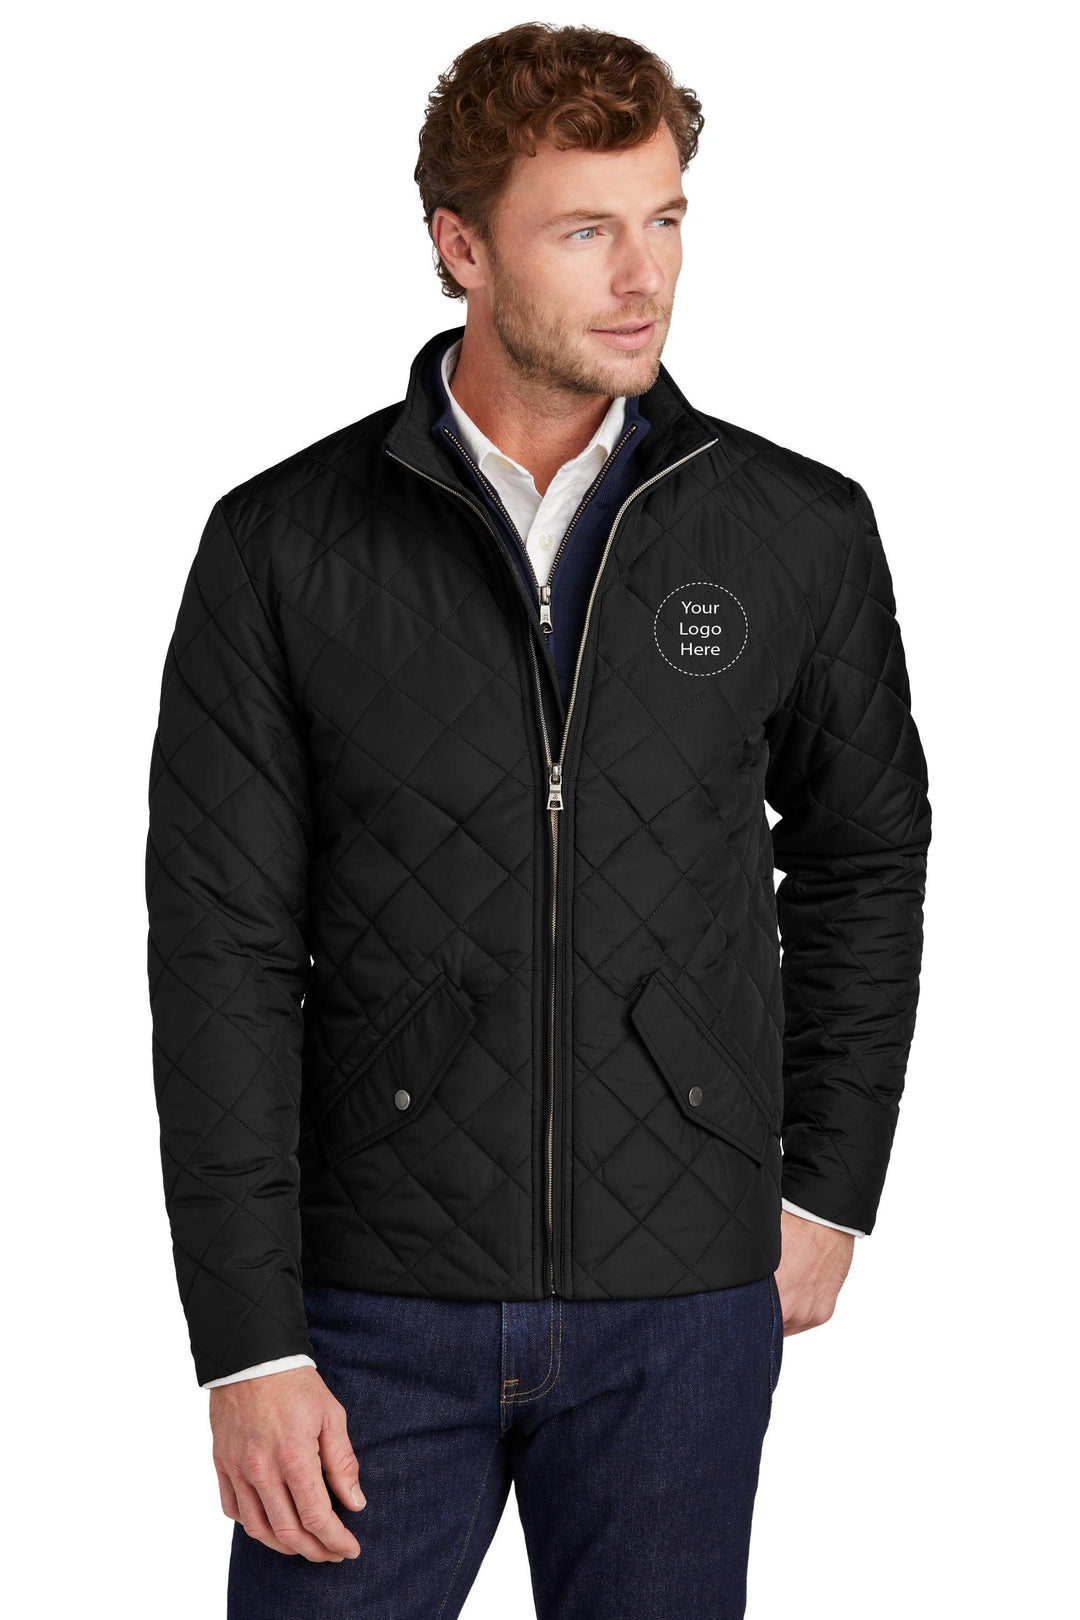 Keller Williams NEW KW-BB18600 Brooks Brothers® Quilted Jacket 